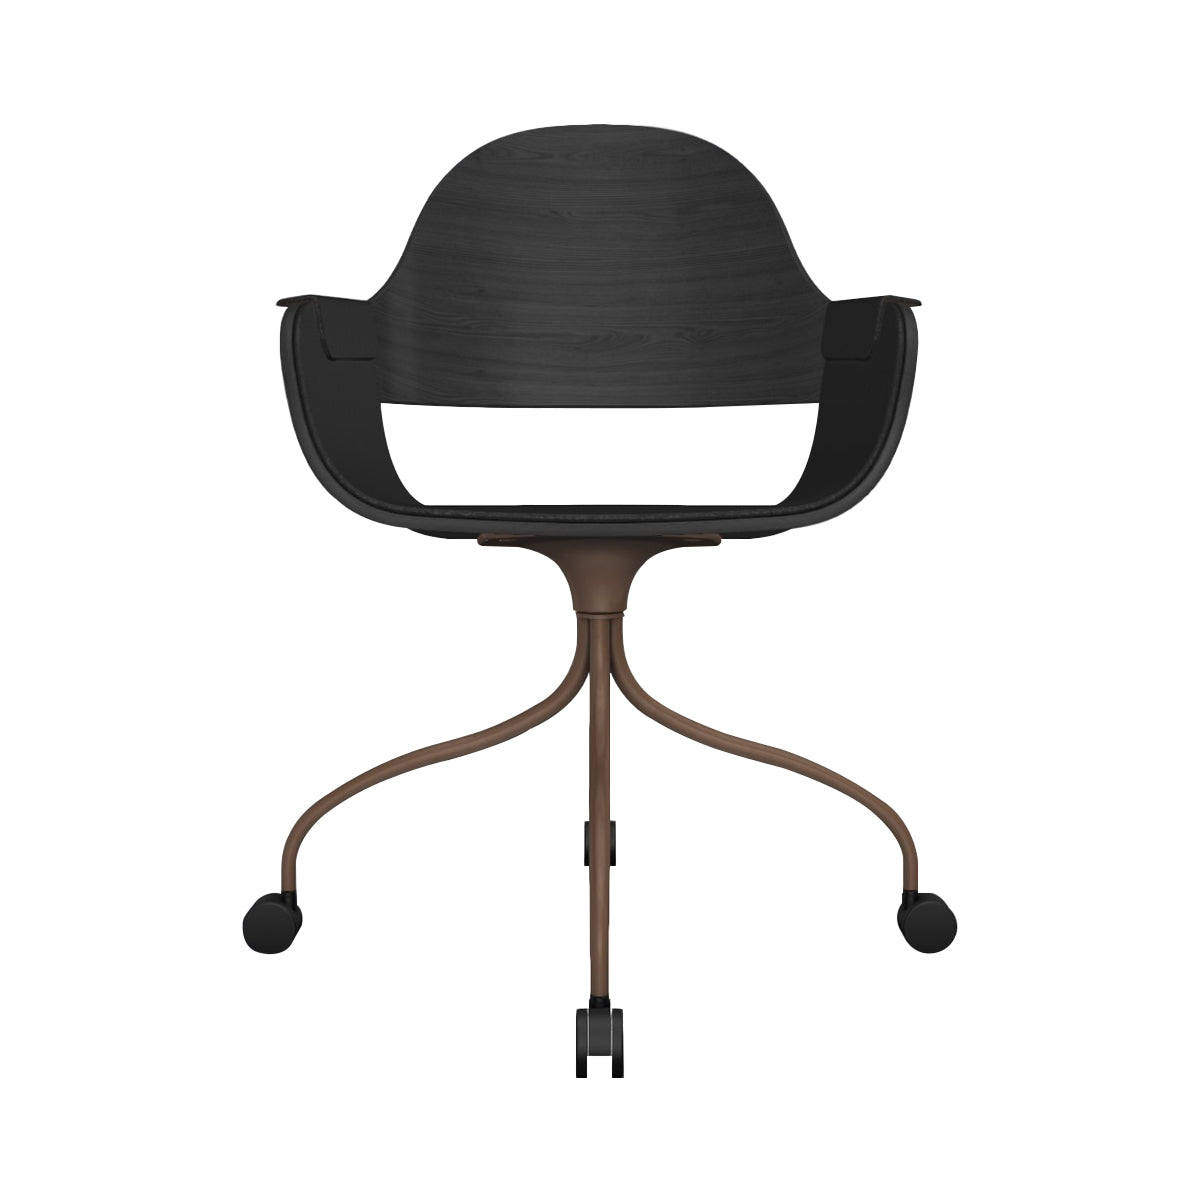 Showtime Nude Chair with Wheel: Interior Seat + Armrest Upholstered + Ash Stained Black + Pale Brown